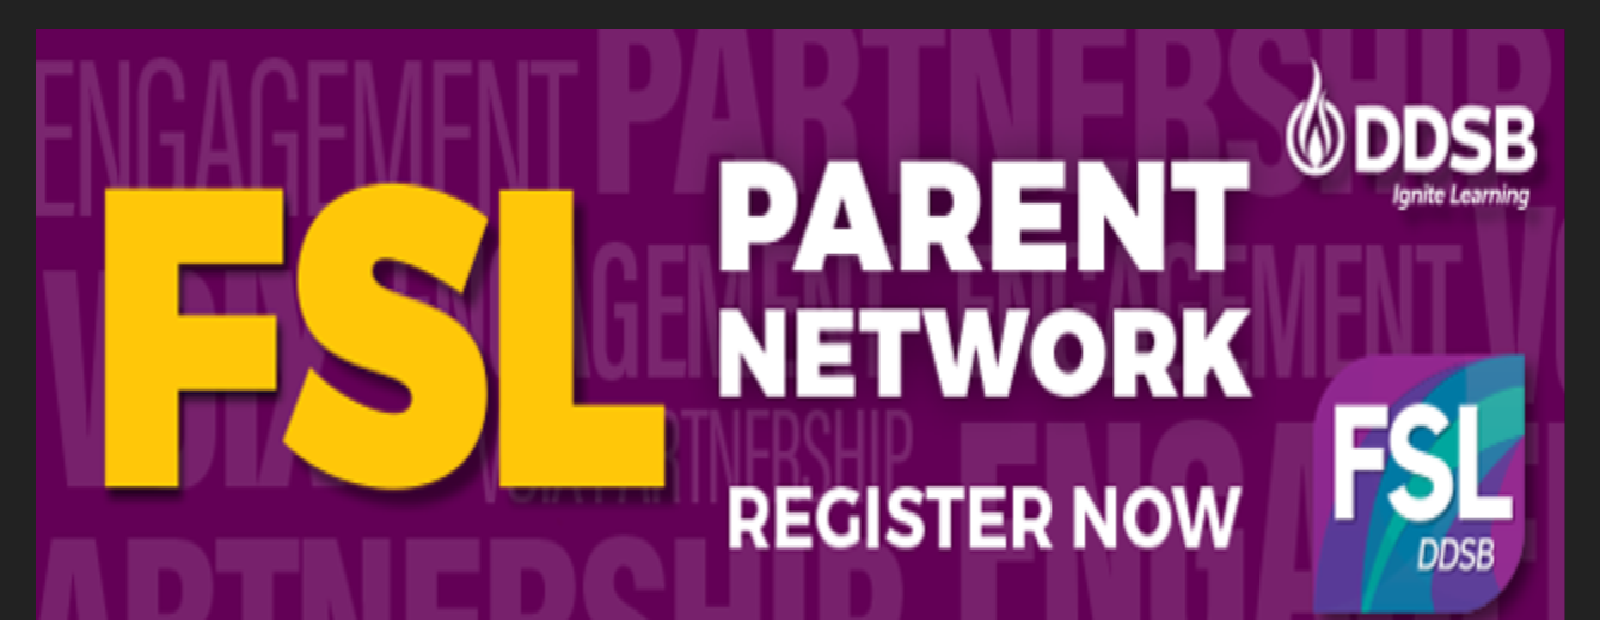 FSL Parent Network poster with yellow writing on a purle background 